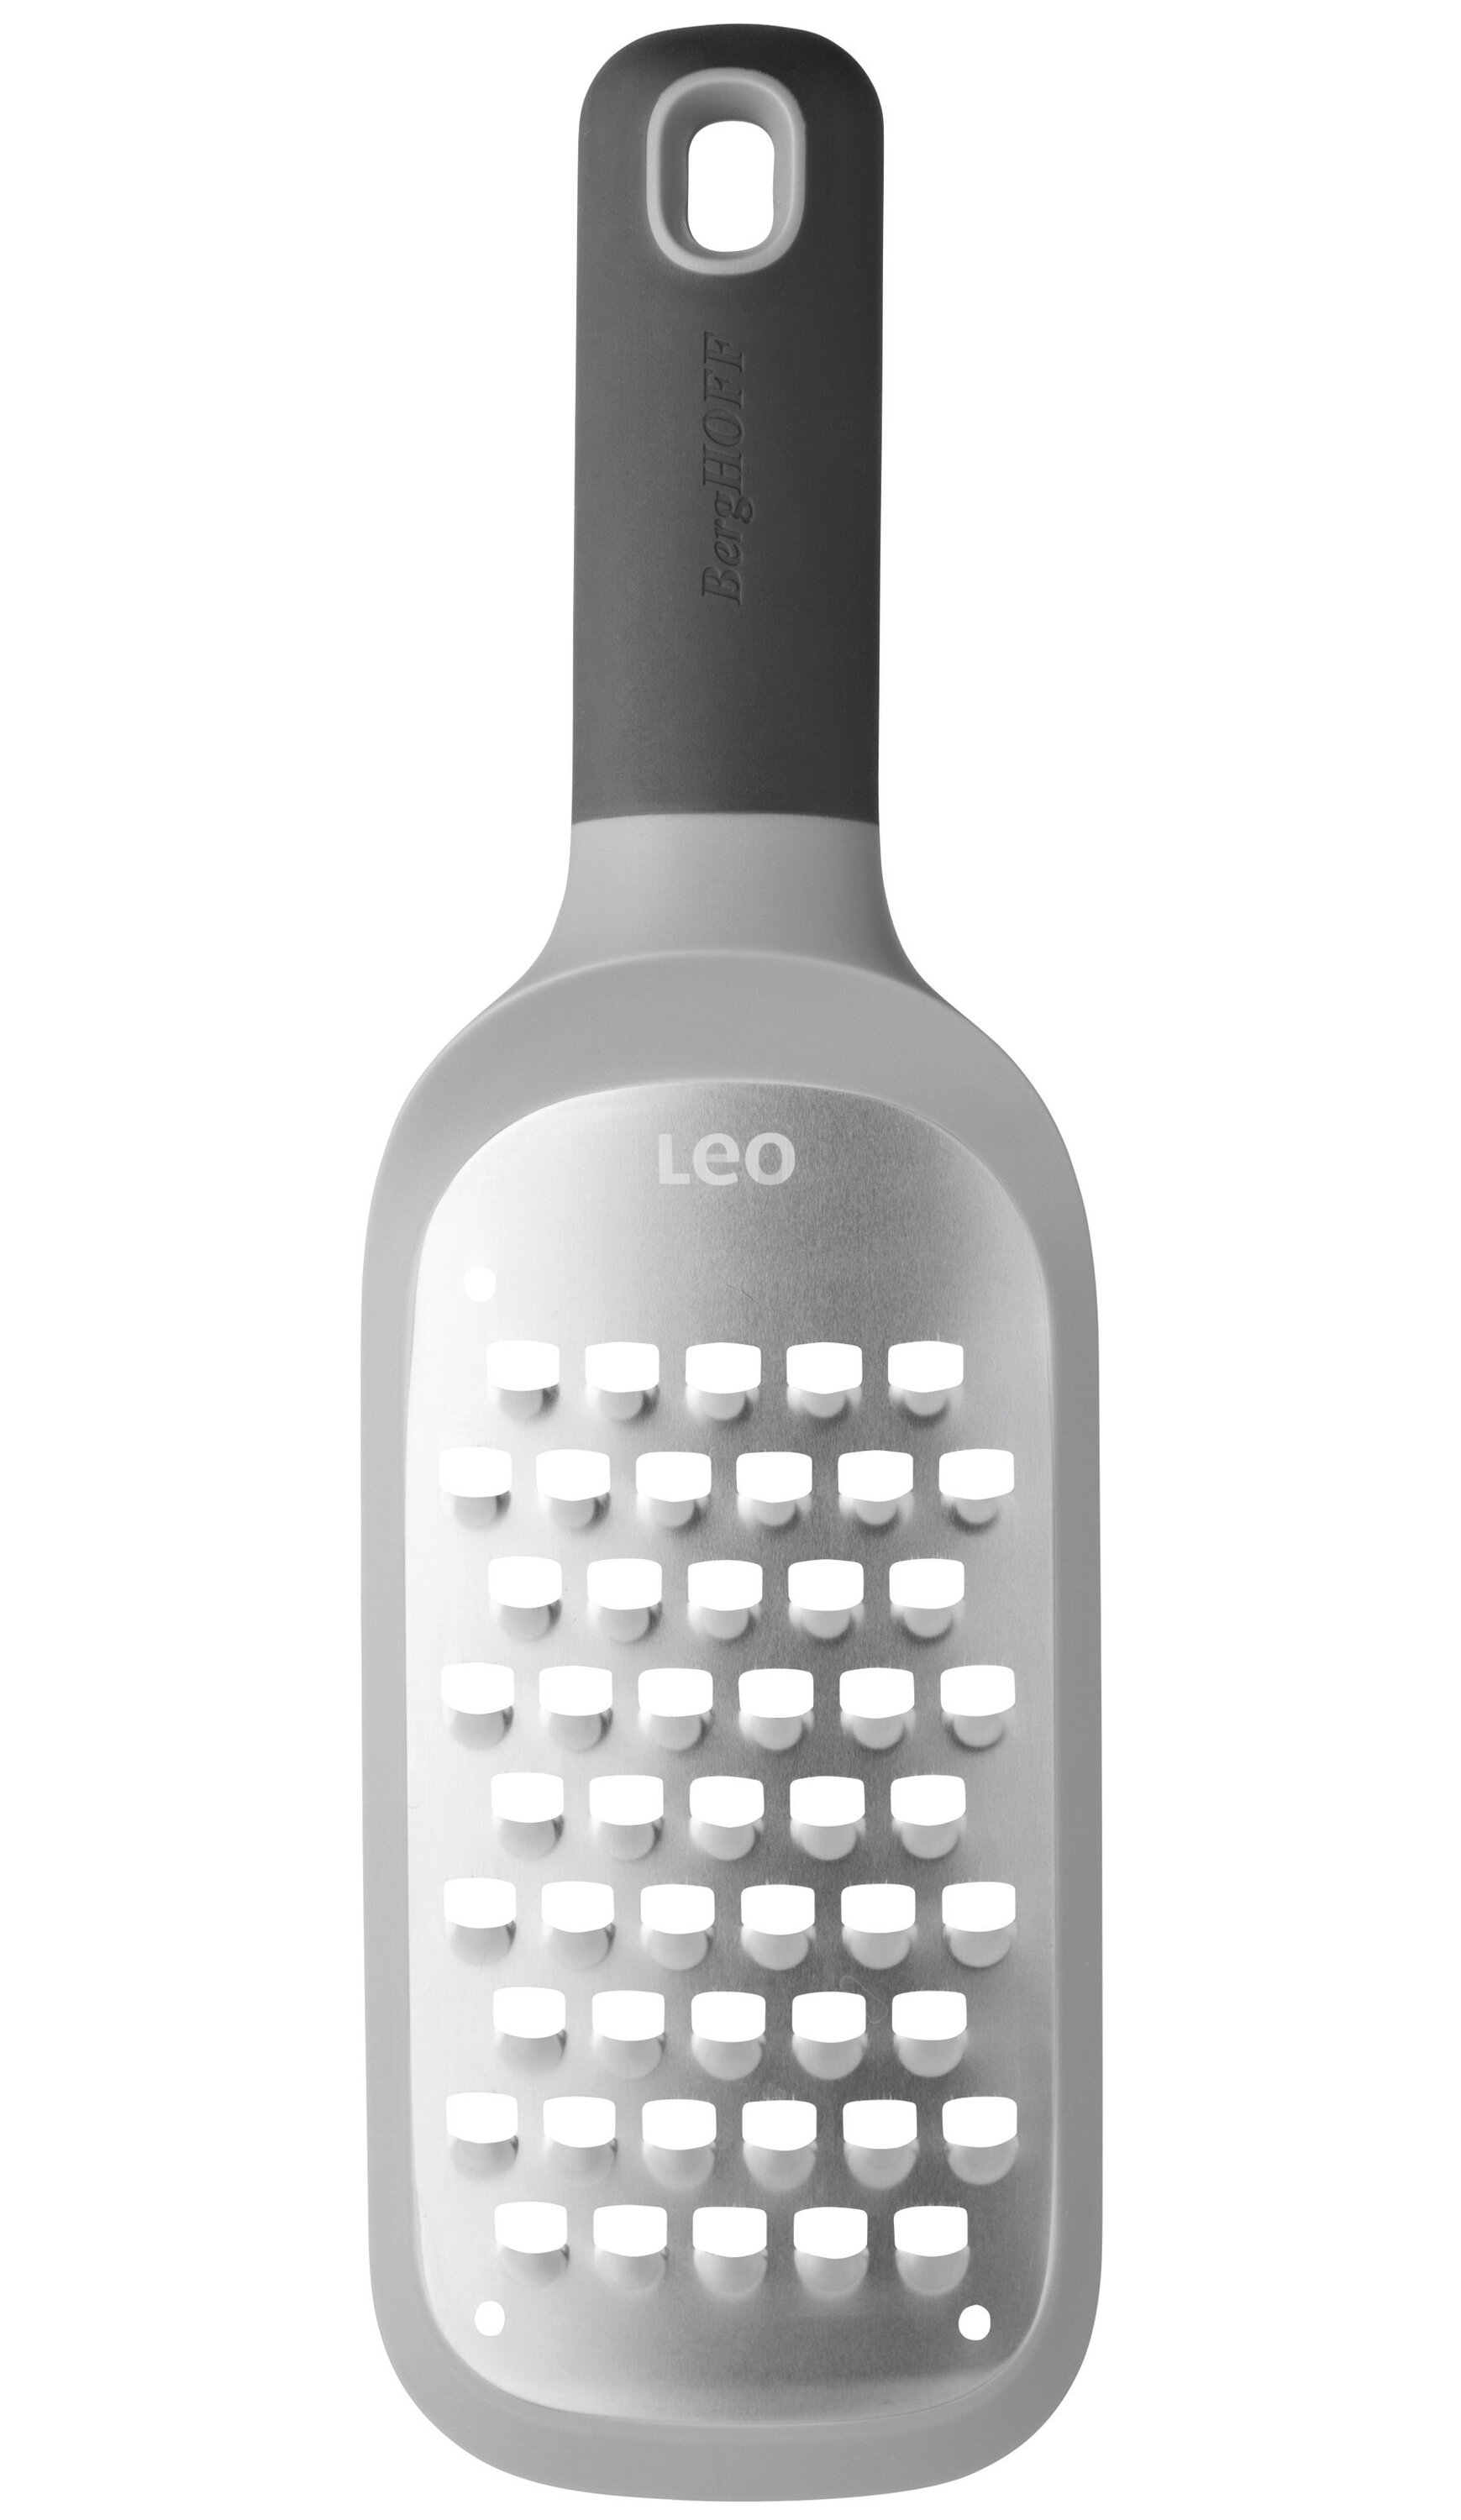 Cuisinox Stainless Steel Cheese Grater with Soft Touch Handle & Reviews